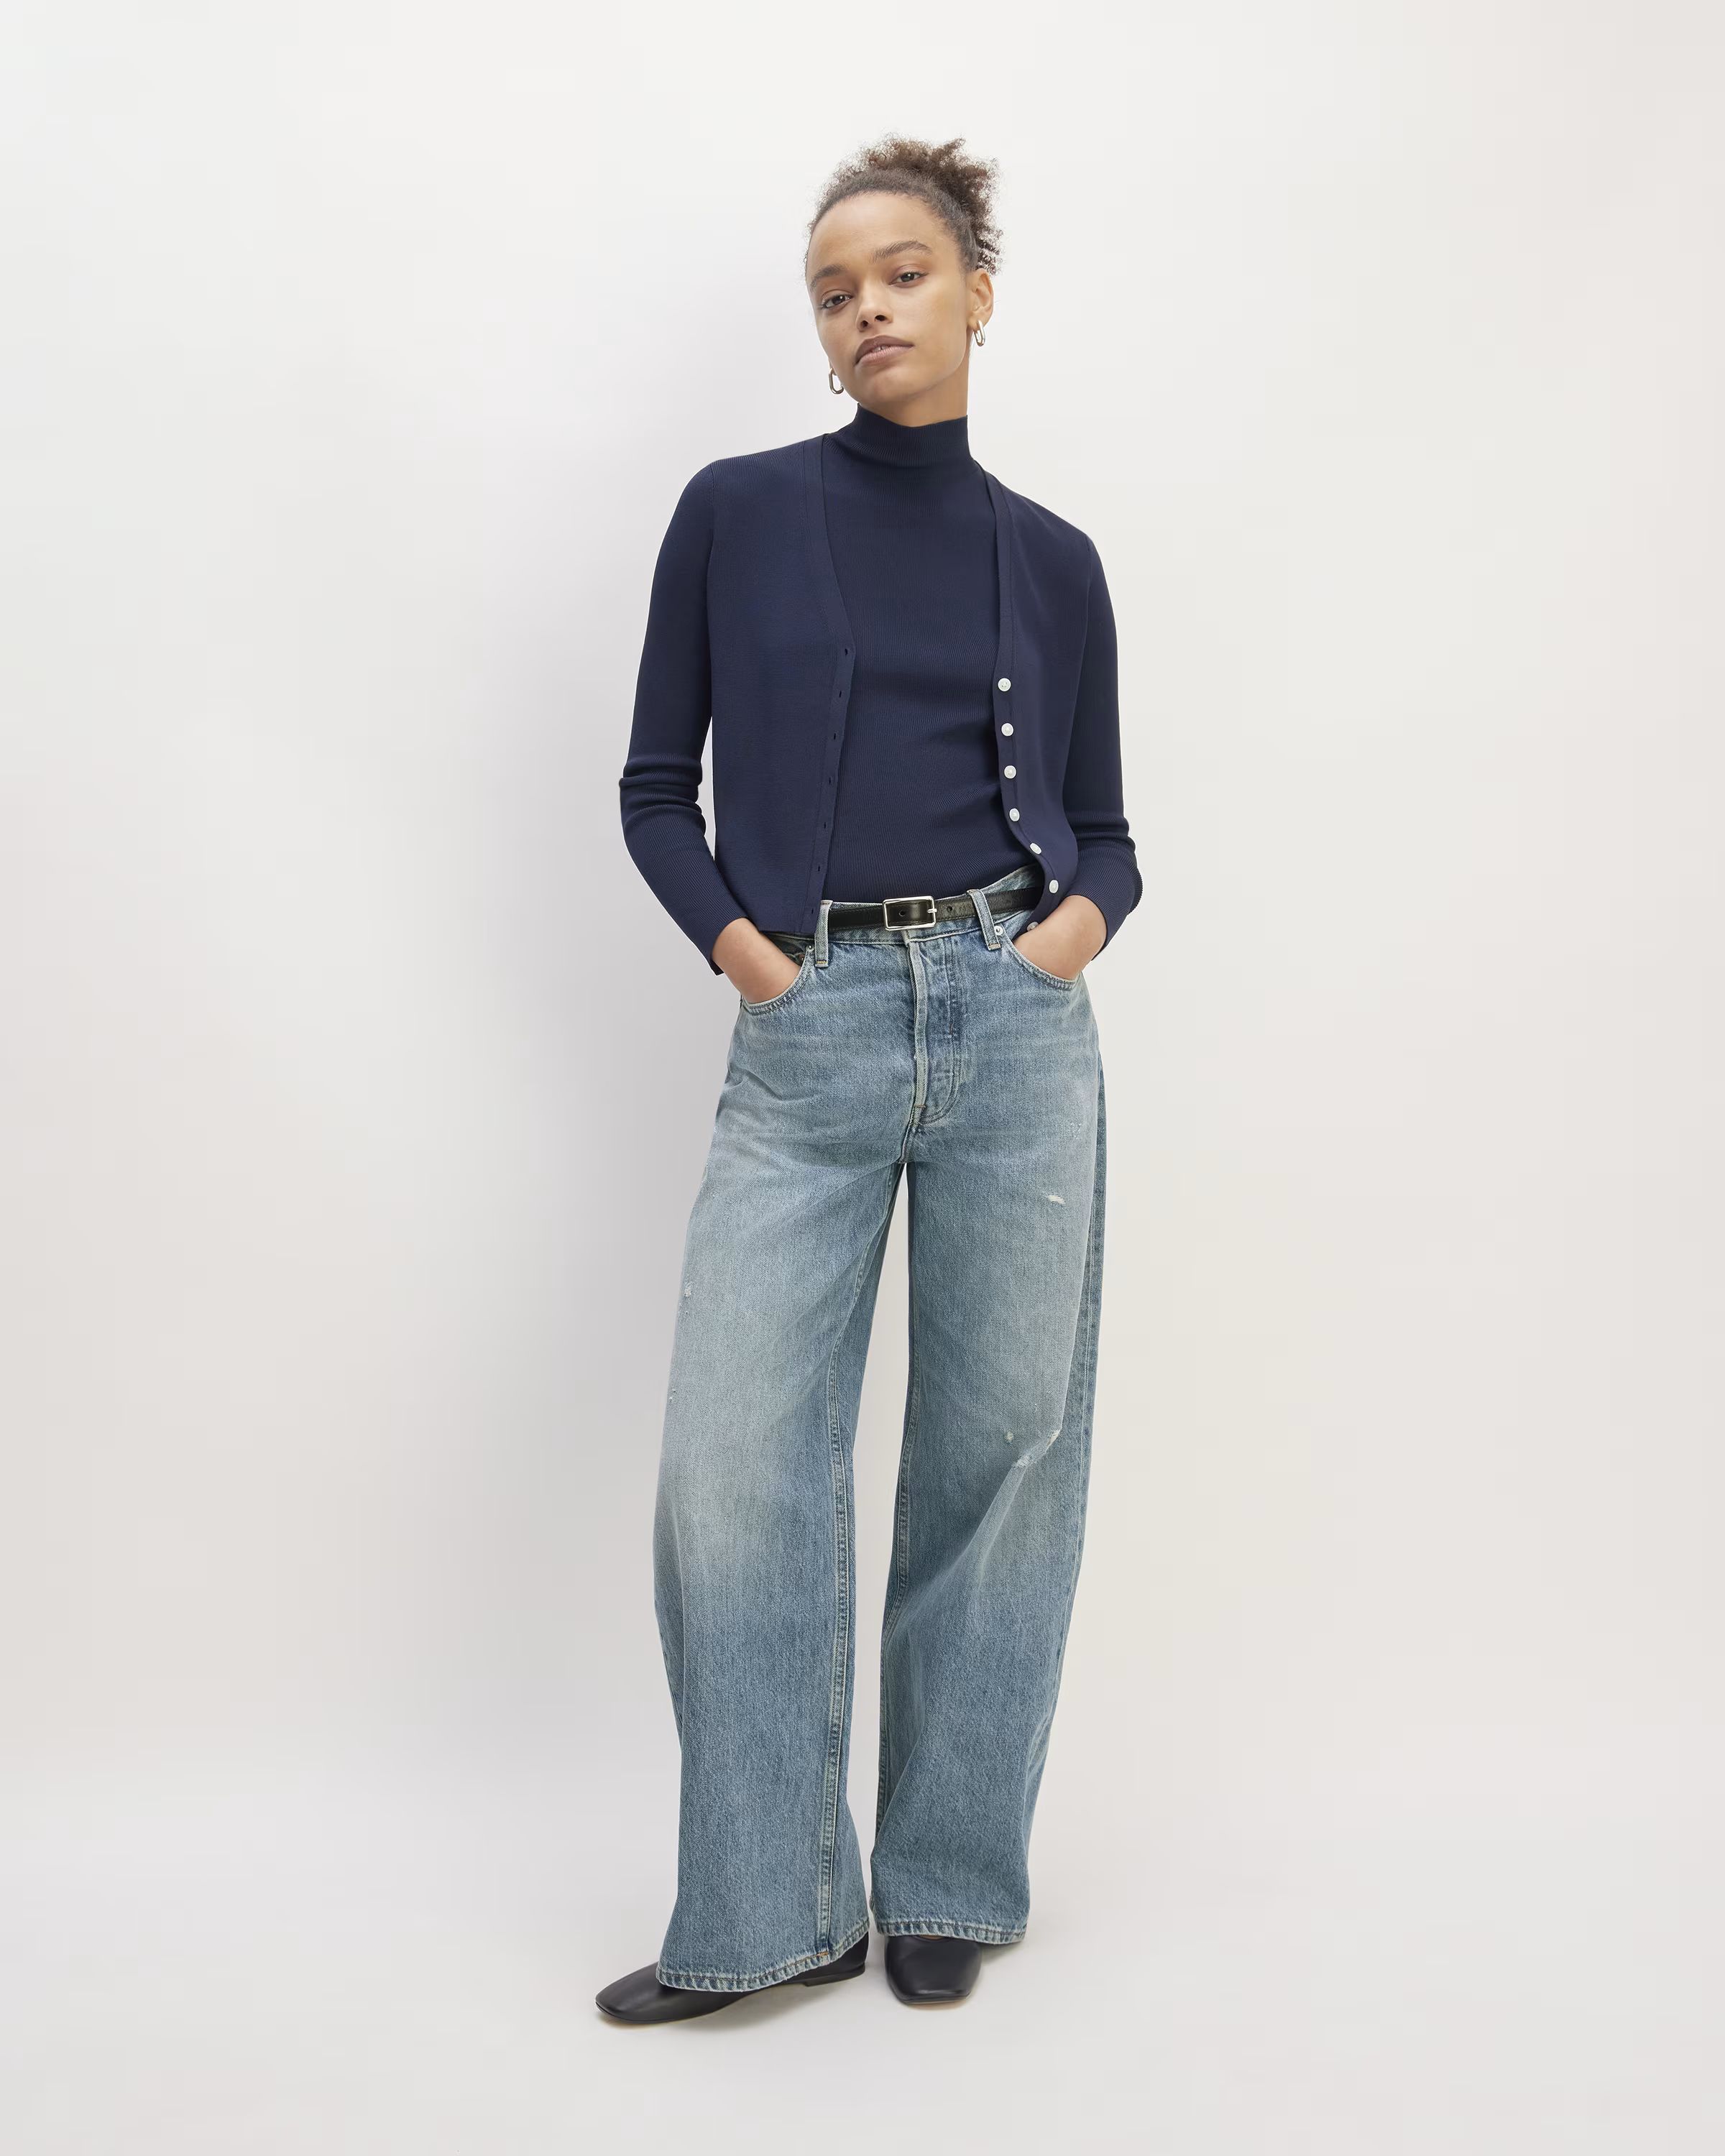 The Super Baggy Jean | Everlane